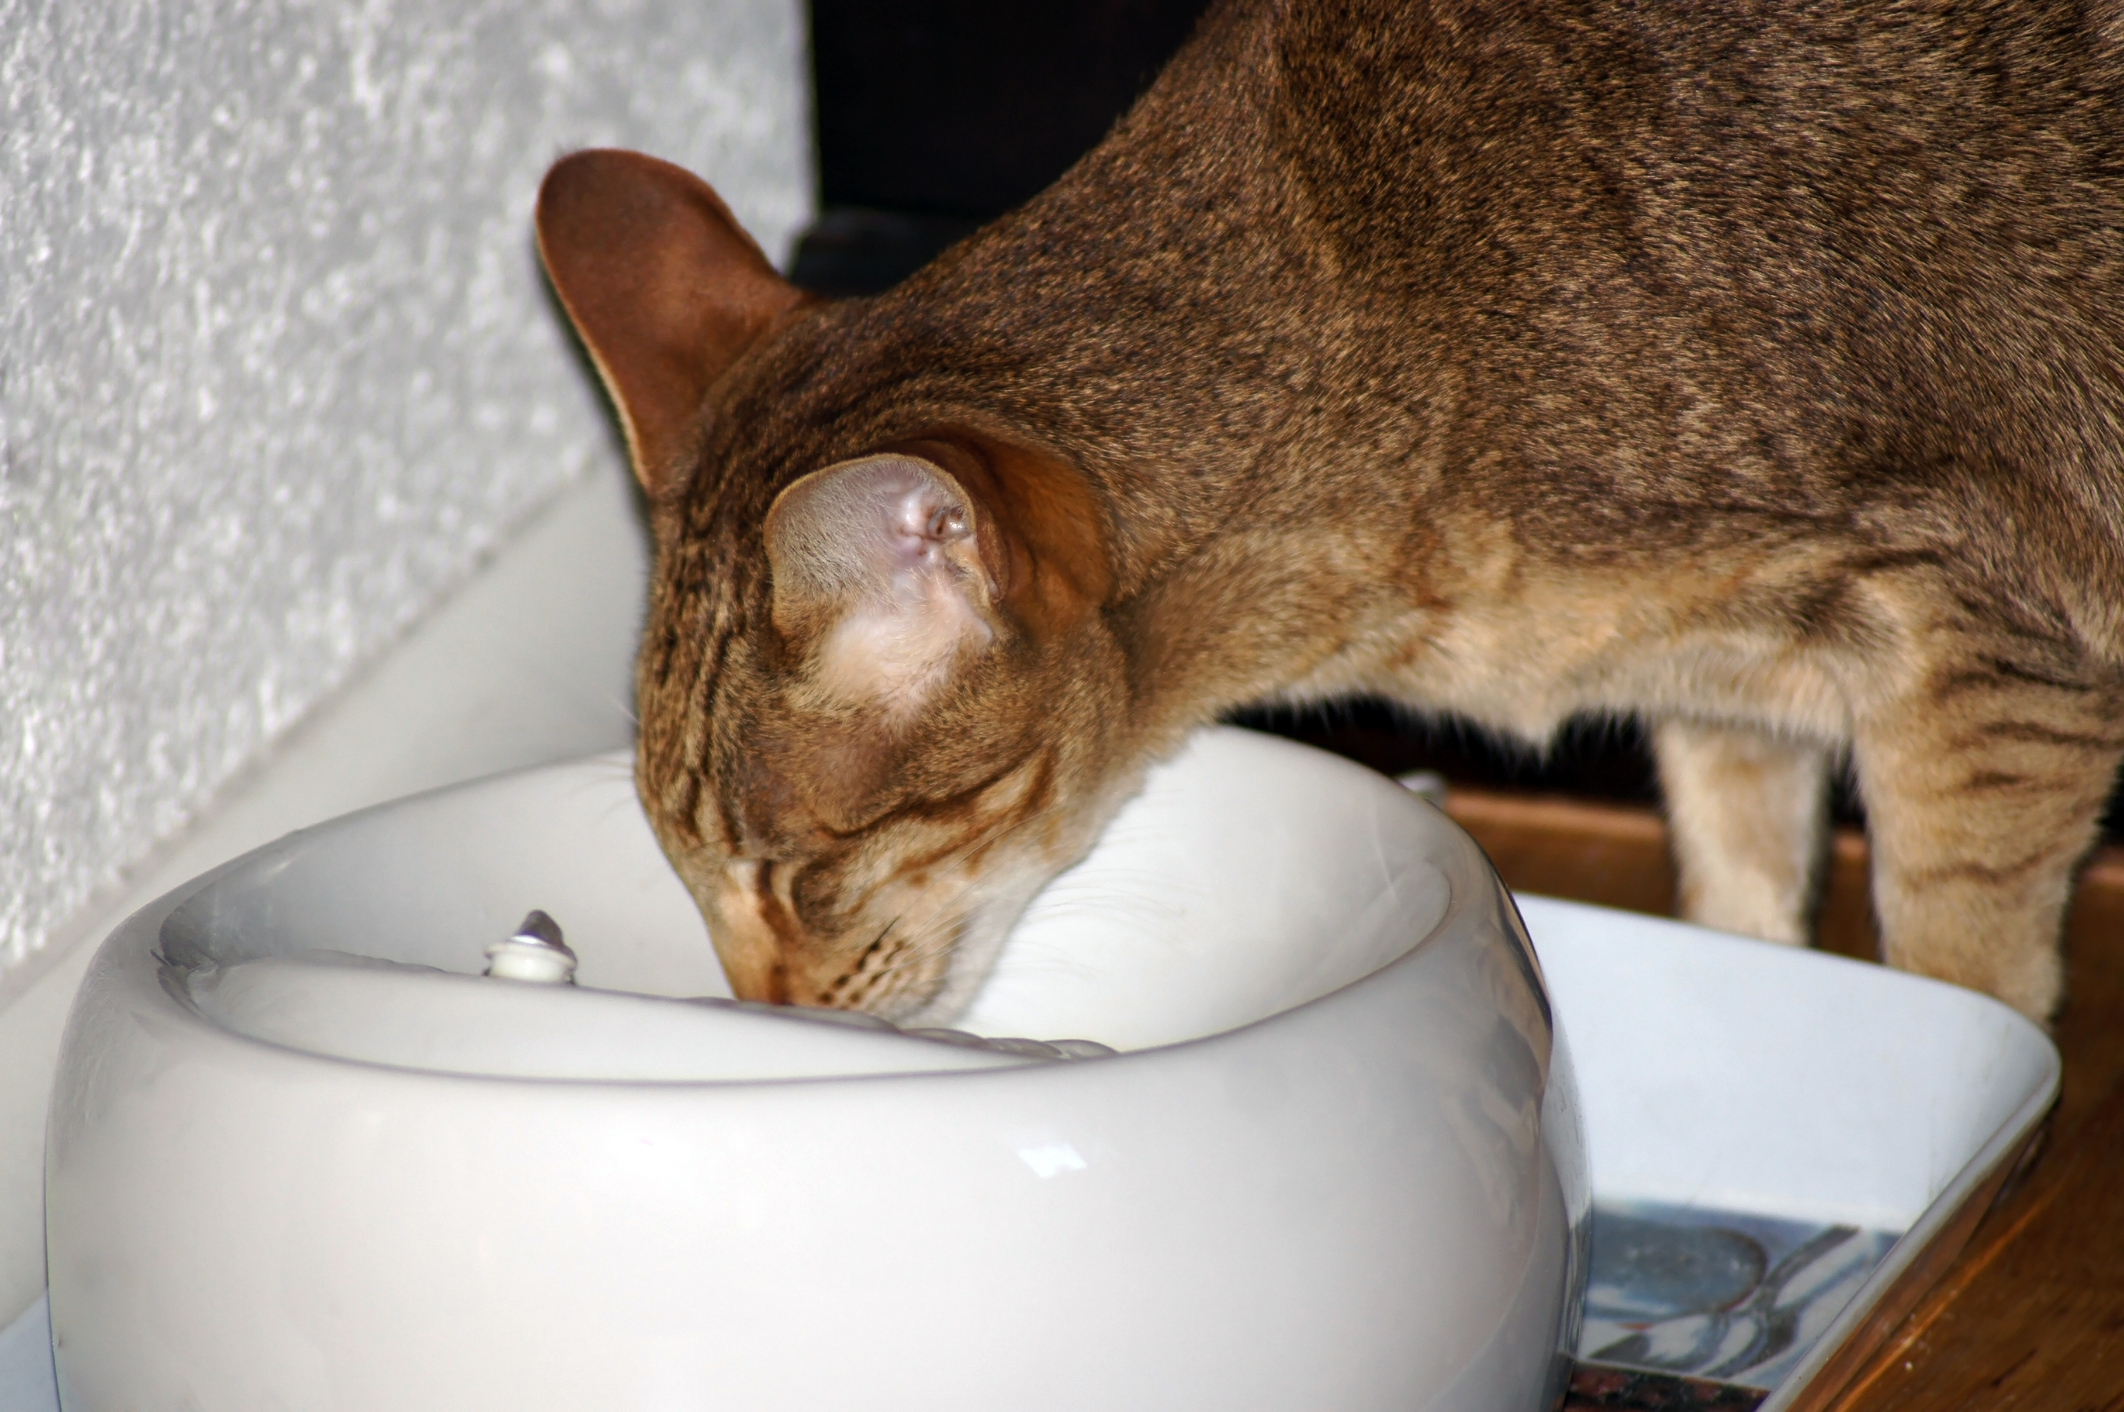 Tabby drinks out of a cat water fountain to stay hydrated